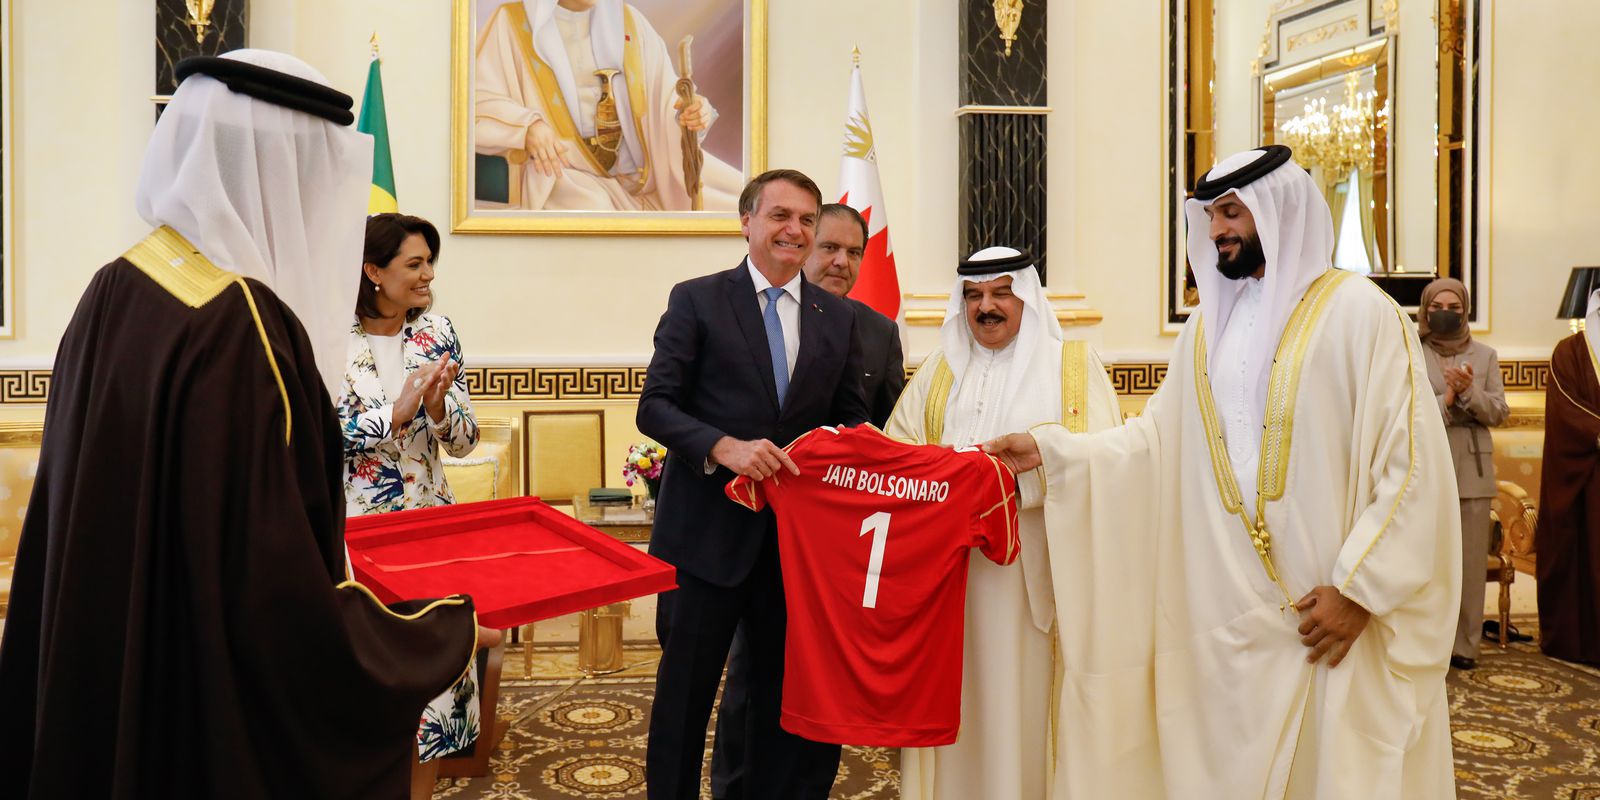 On a visit to Bahrain, the president debates new commercial partnerships